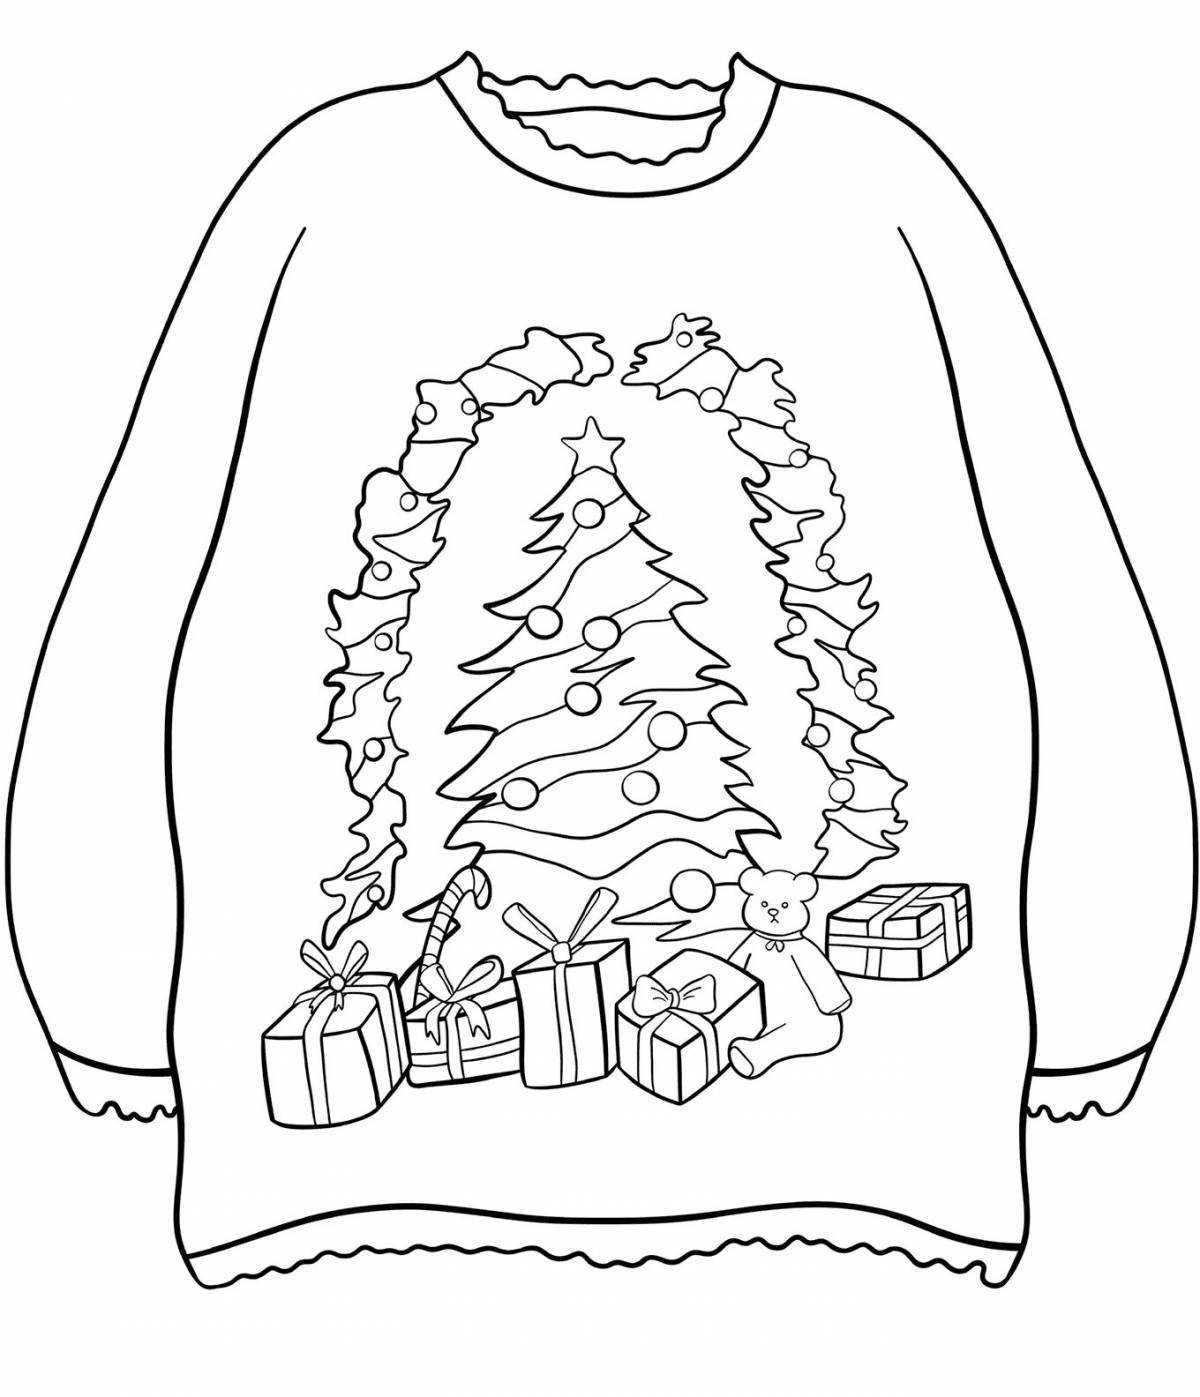 Color-frenzy sweater coloring page for kids